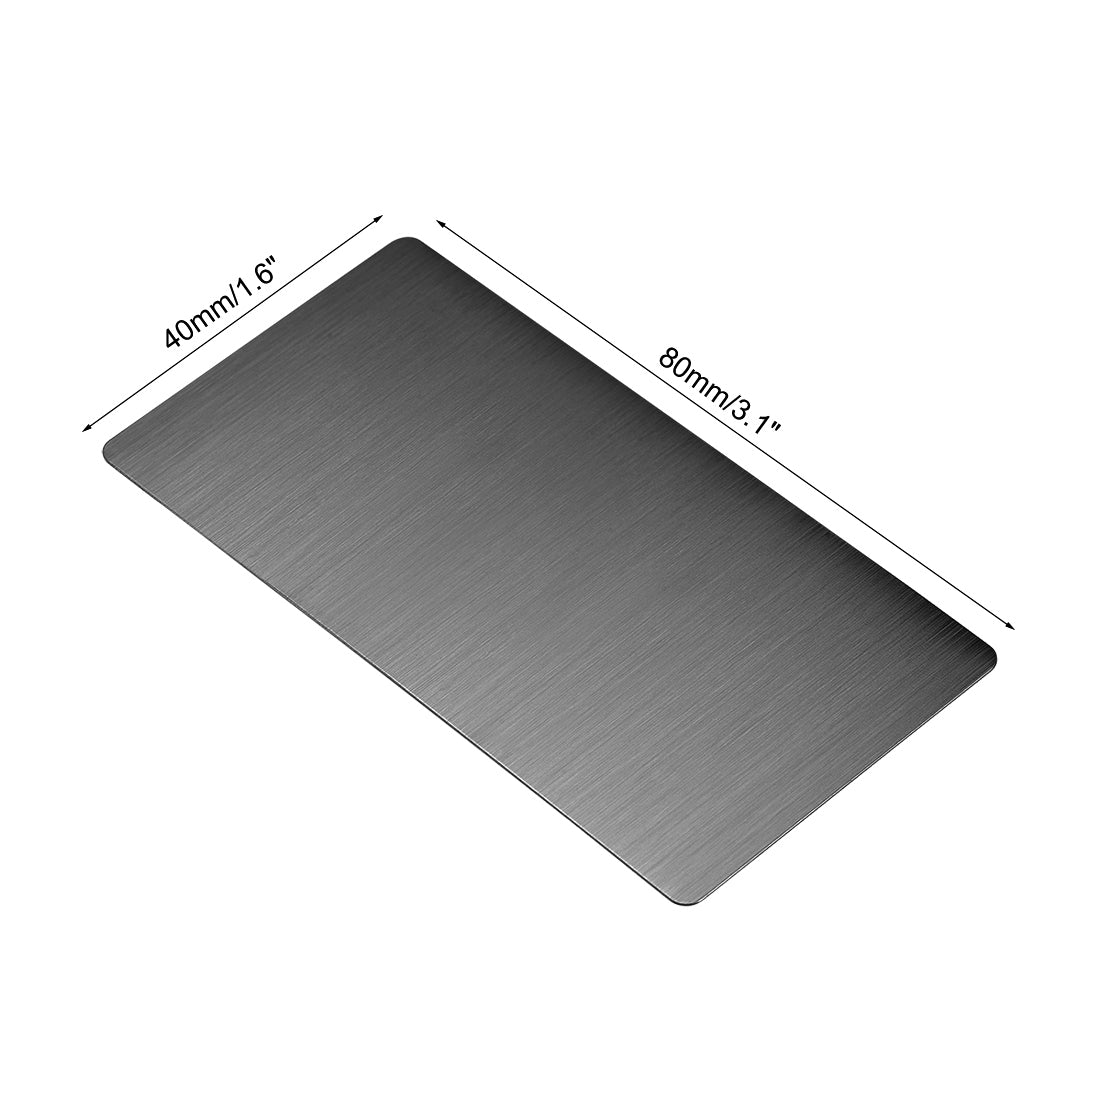 Uxcell Uxcell Blank Metal Business Card 80x50x0.4mm Brushed 201 Stainless Steel Plate for DIY Laser Printing Silver Tone 10 Pcs